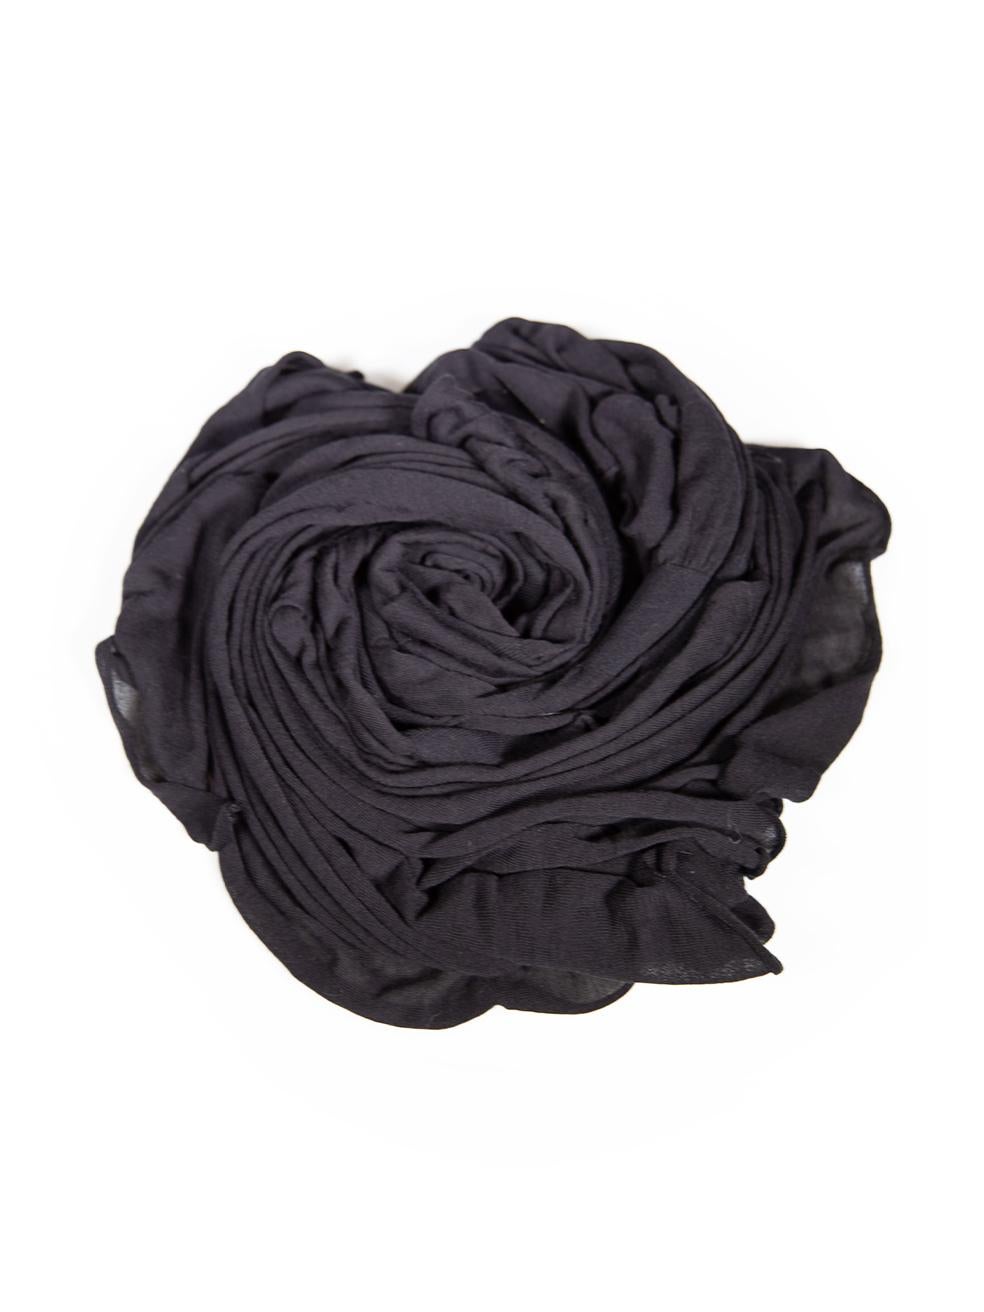 Yohji Yamamoto Black Ruched Accent Scarf In Good Condition For Sale In London, GB